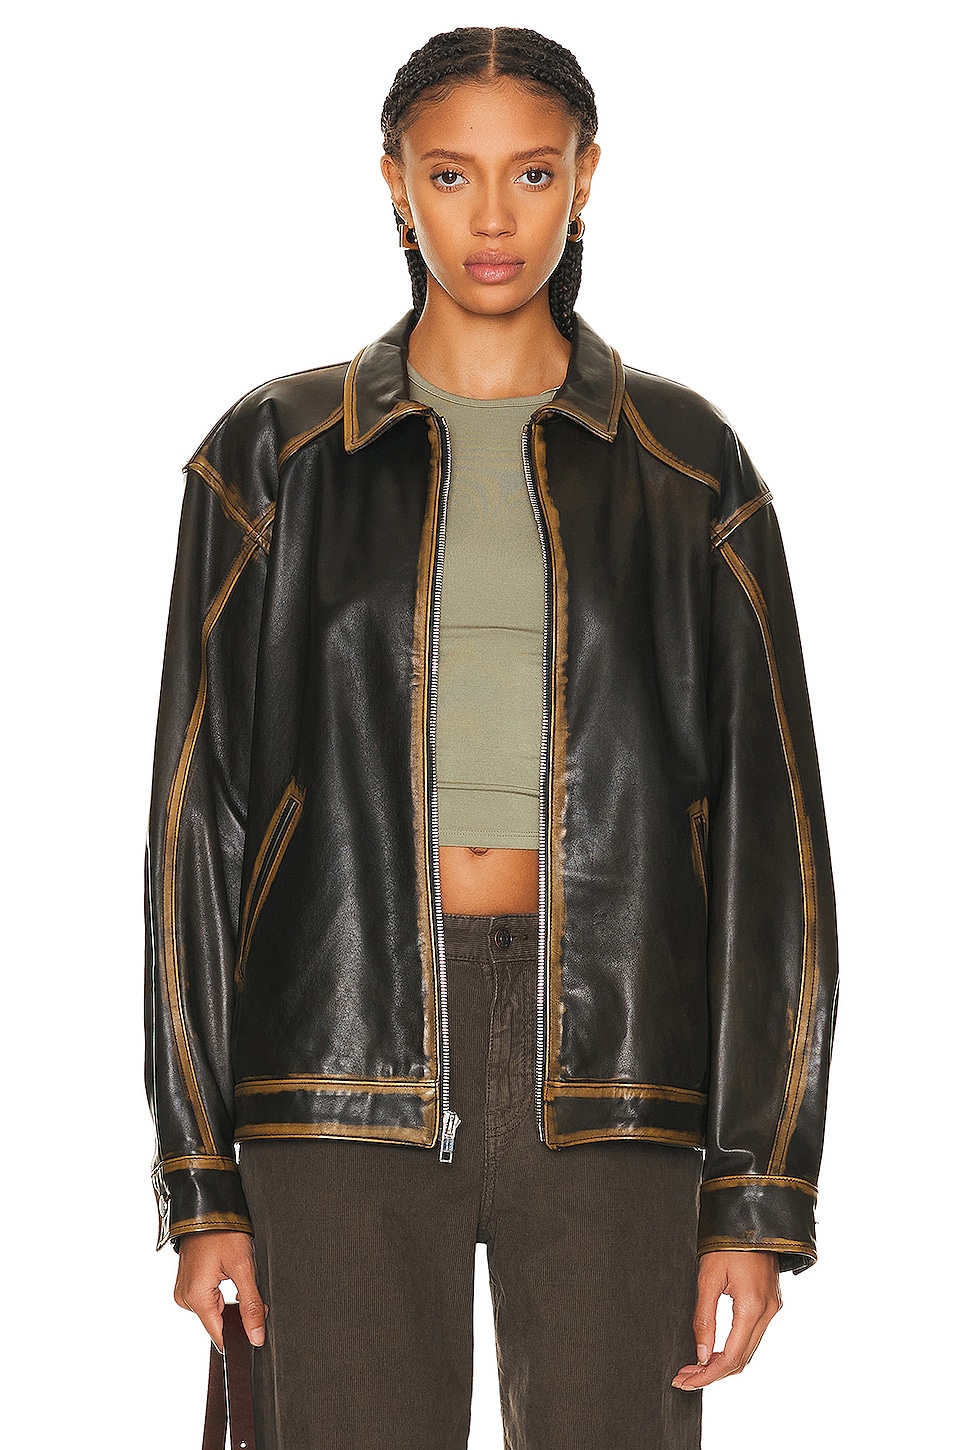 Image 1 of Mimchik Leather Tall Boy Jacket in Olive